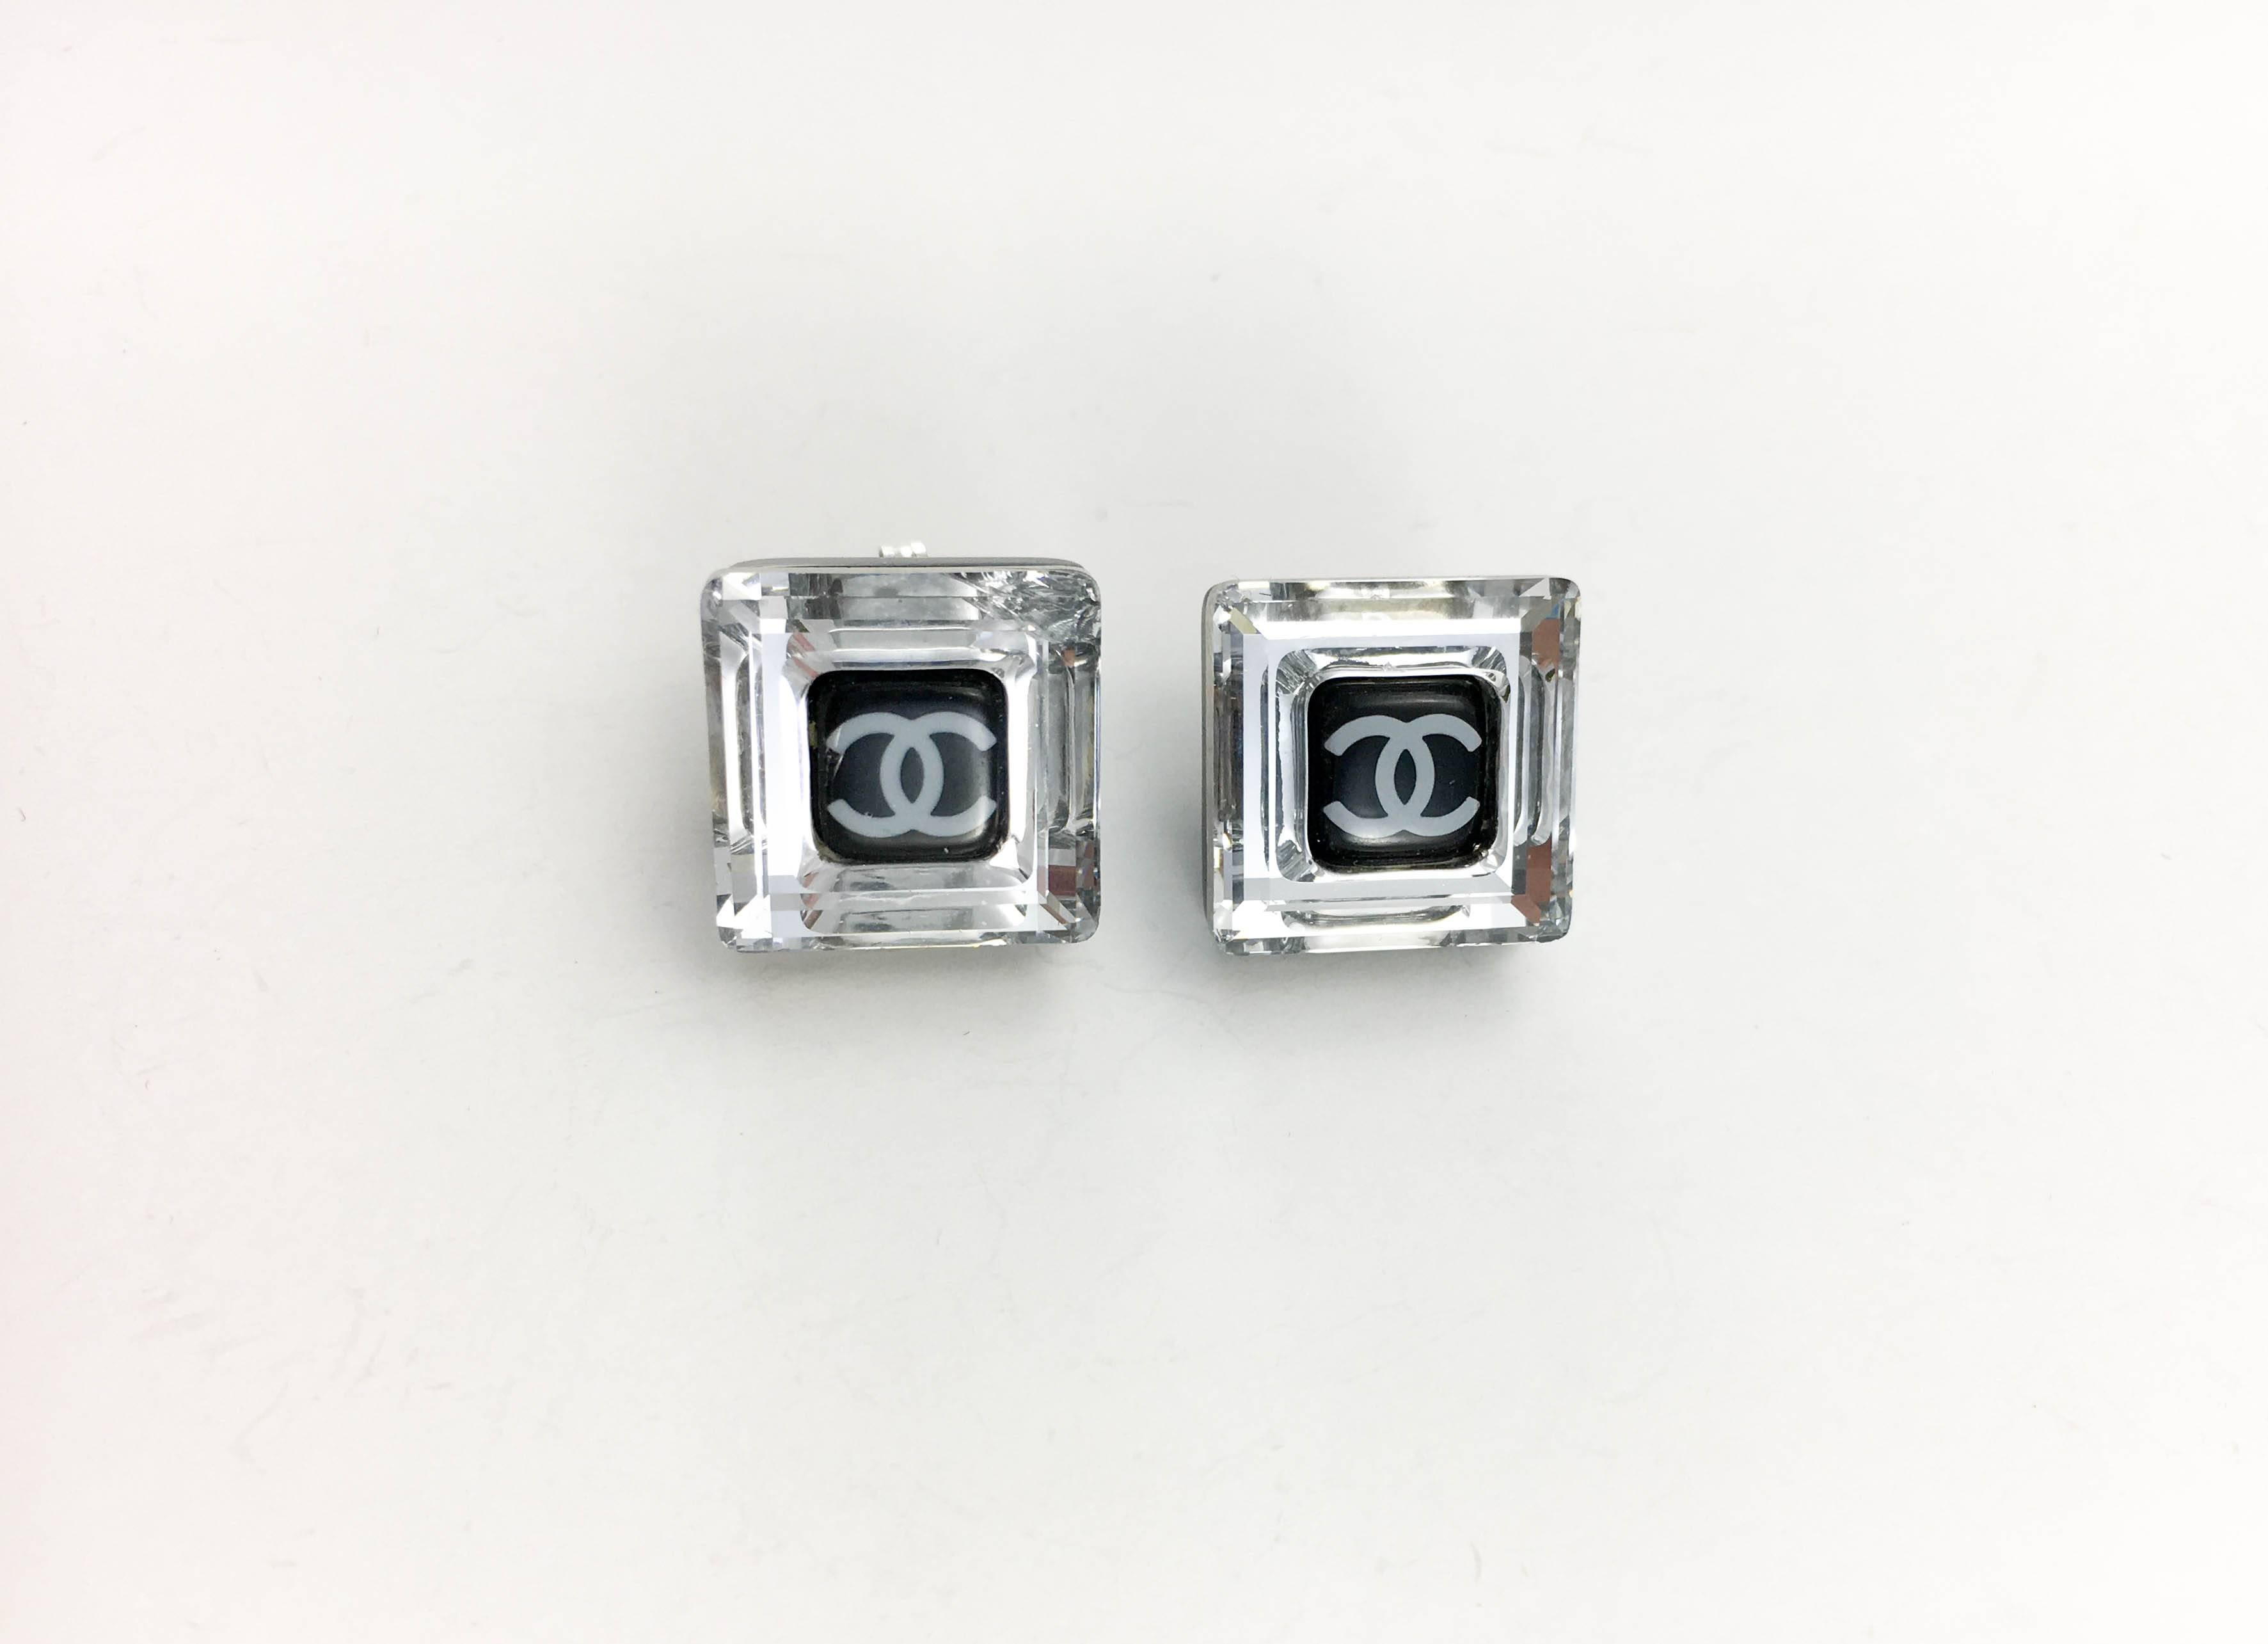 Chanel Square Logo Post Earrings. These beautiful earrings by Chanel were created for the 2005 Autumn / Winter Collection. Made in clear and black resin, these delicate square-shaped earrings feature the iconic ‘CC’ logo in the centre. Chanel marked